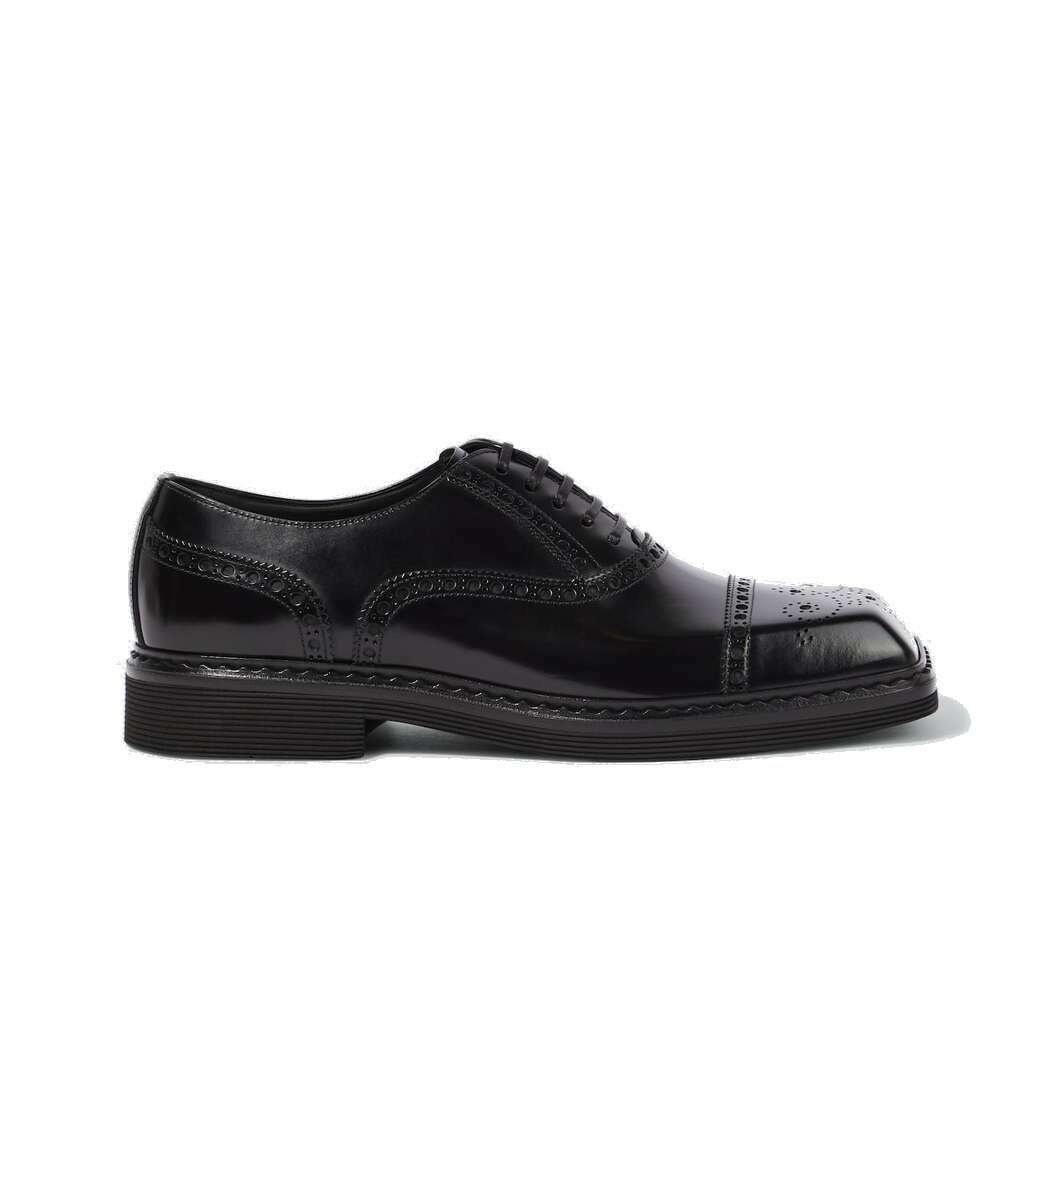 Photo: Dolce&Gabbana Leather Oxford shoes